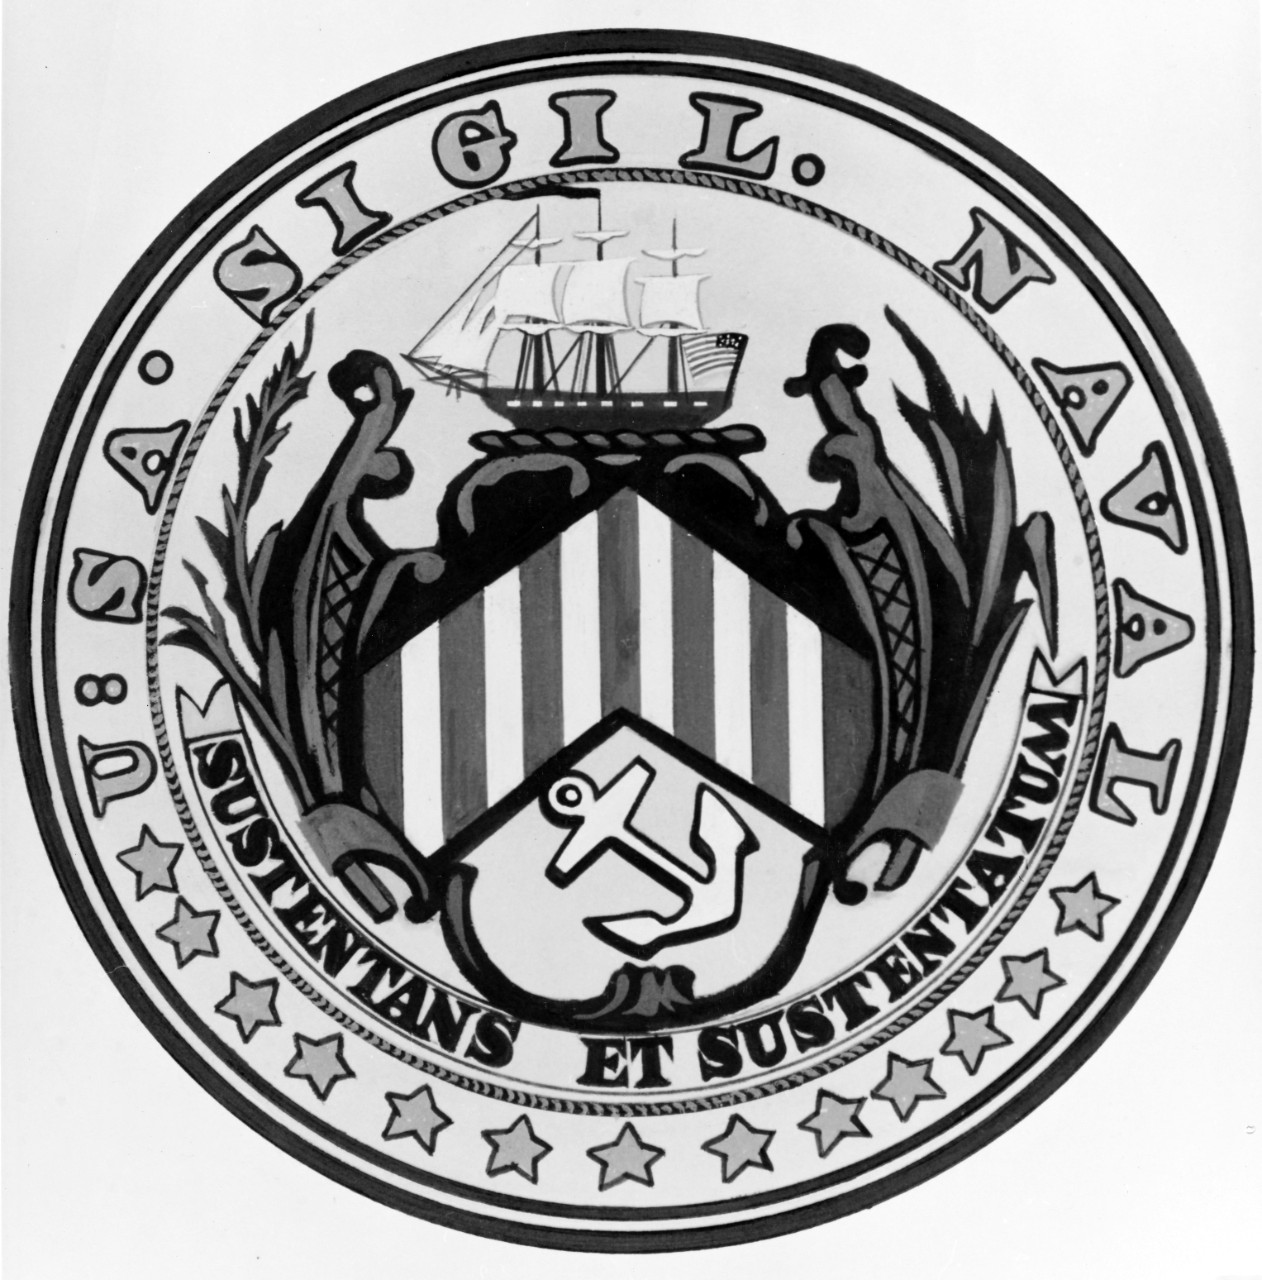 Board of Admiralty Seal, adopted by Congress on 4 May 1780.